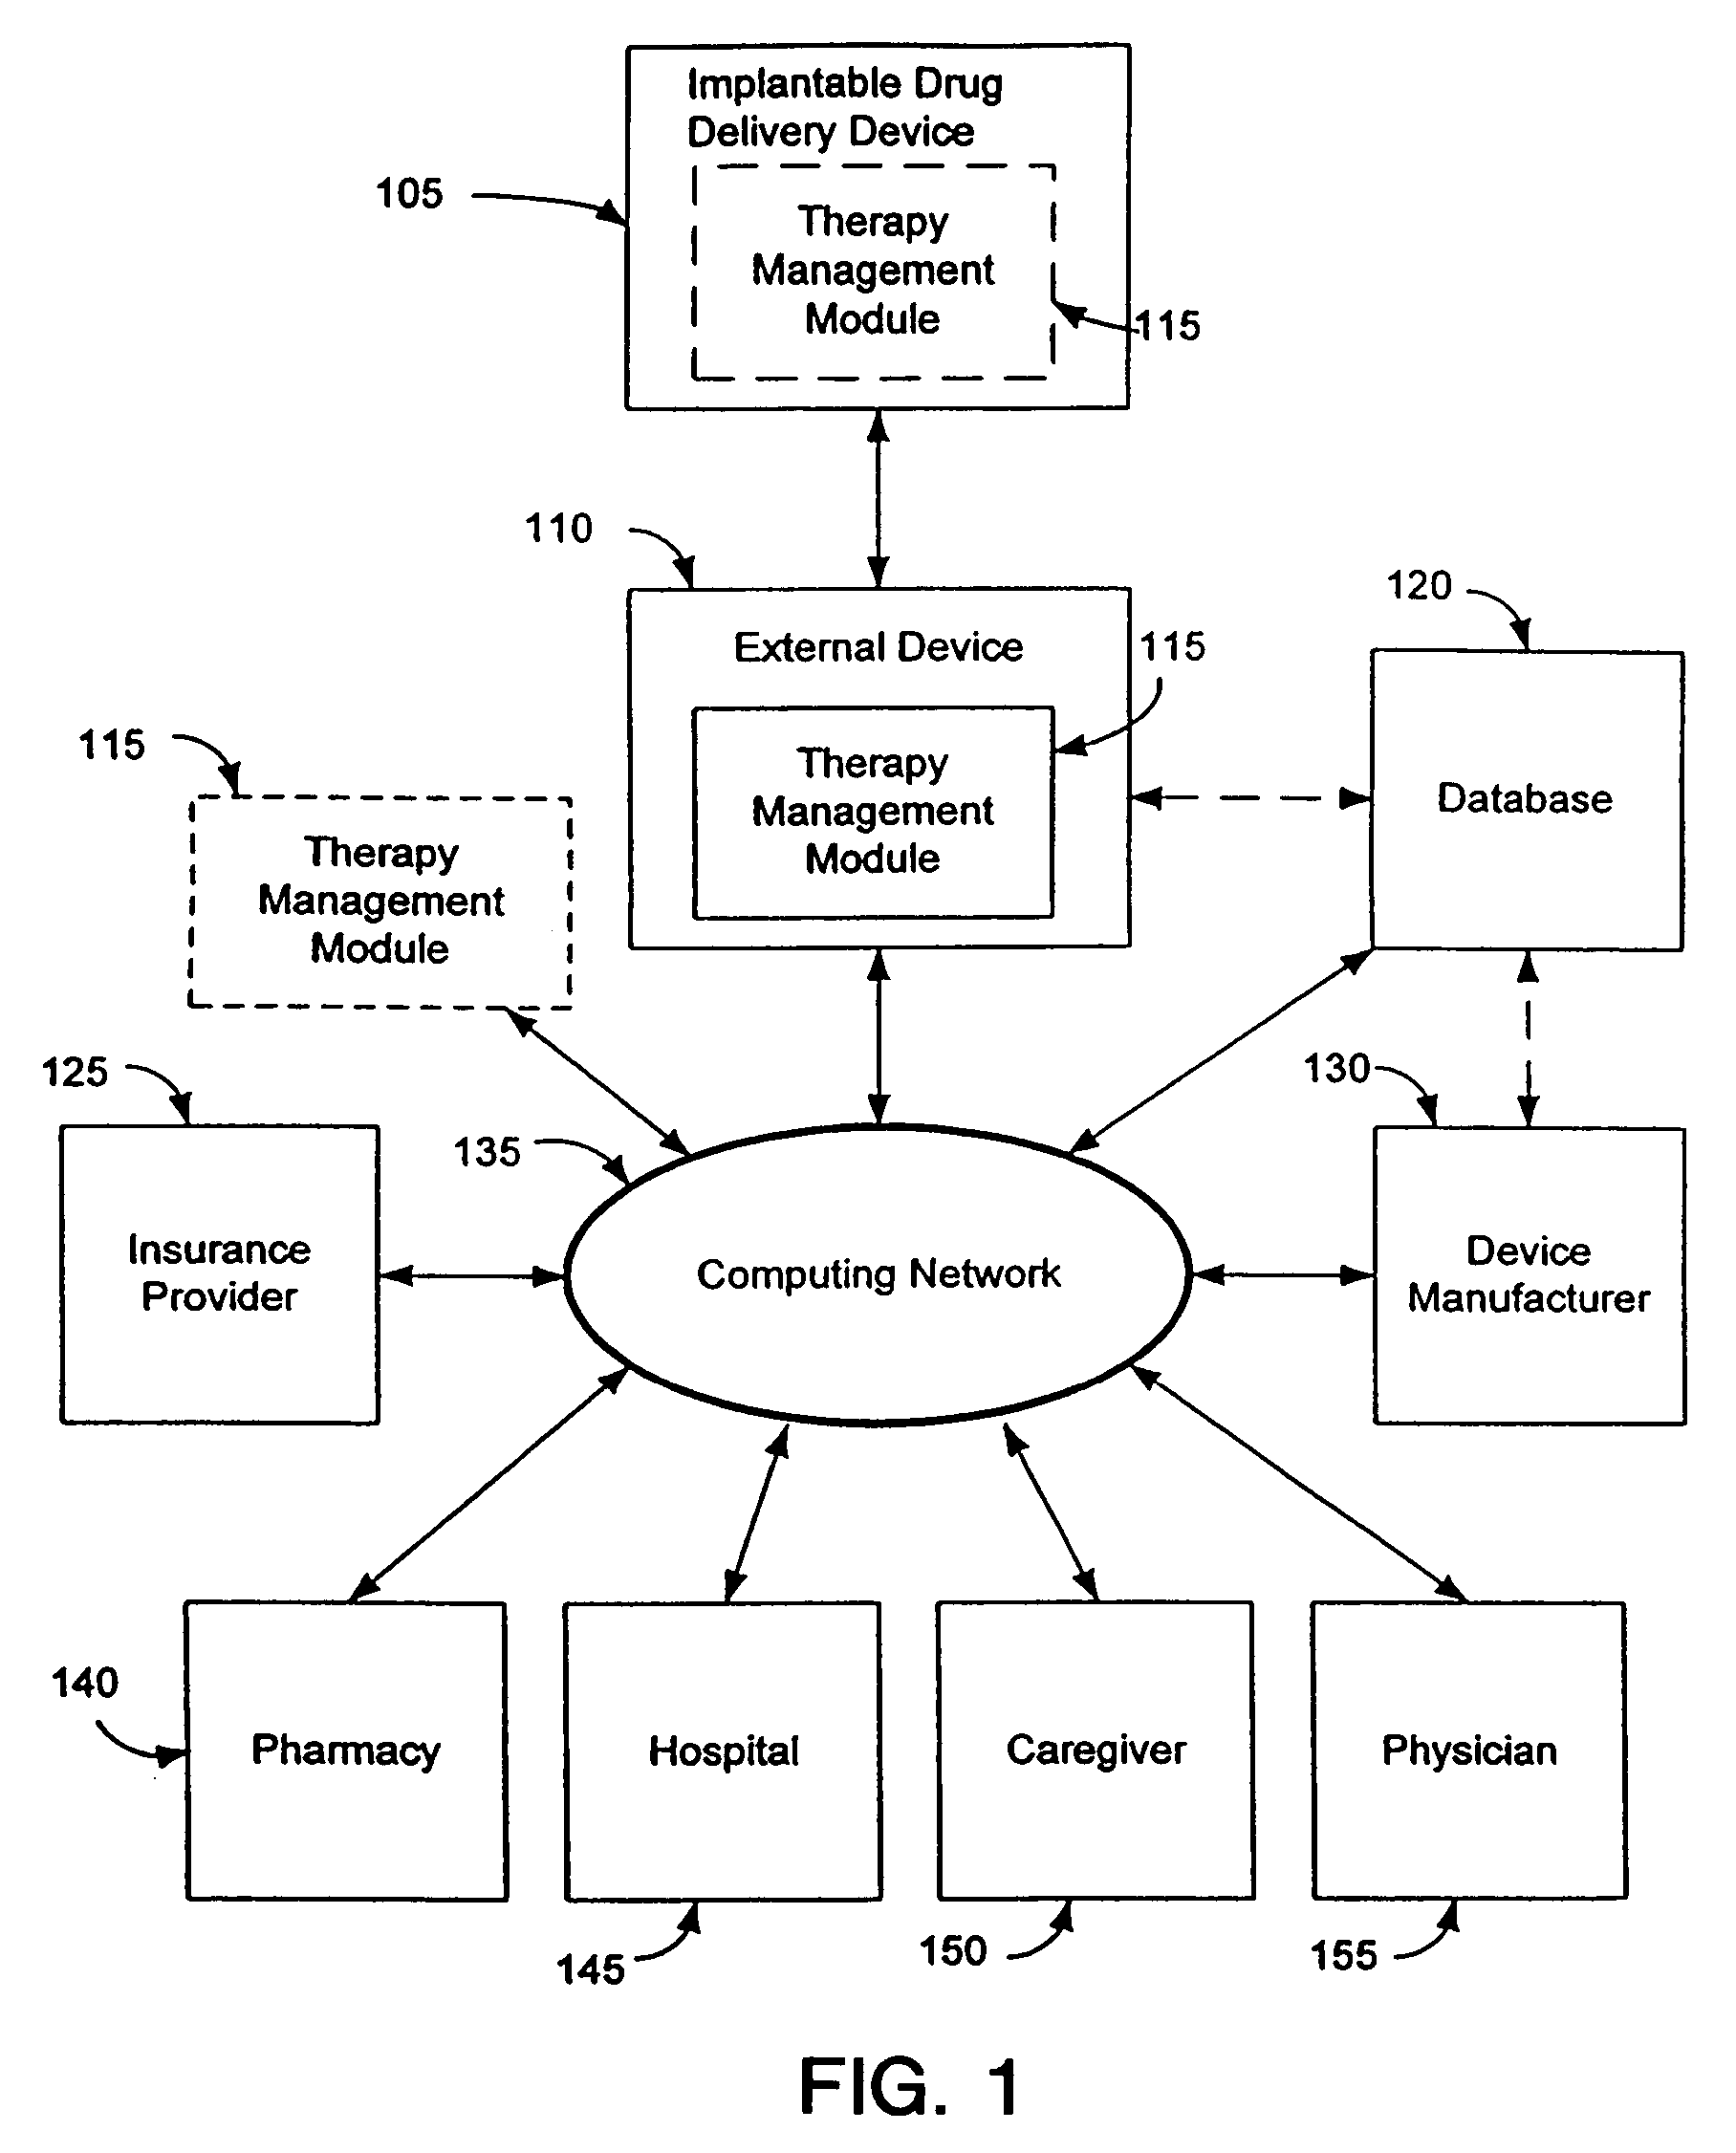 Therapy management techniques for an implantable medical device